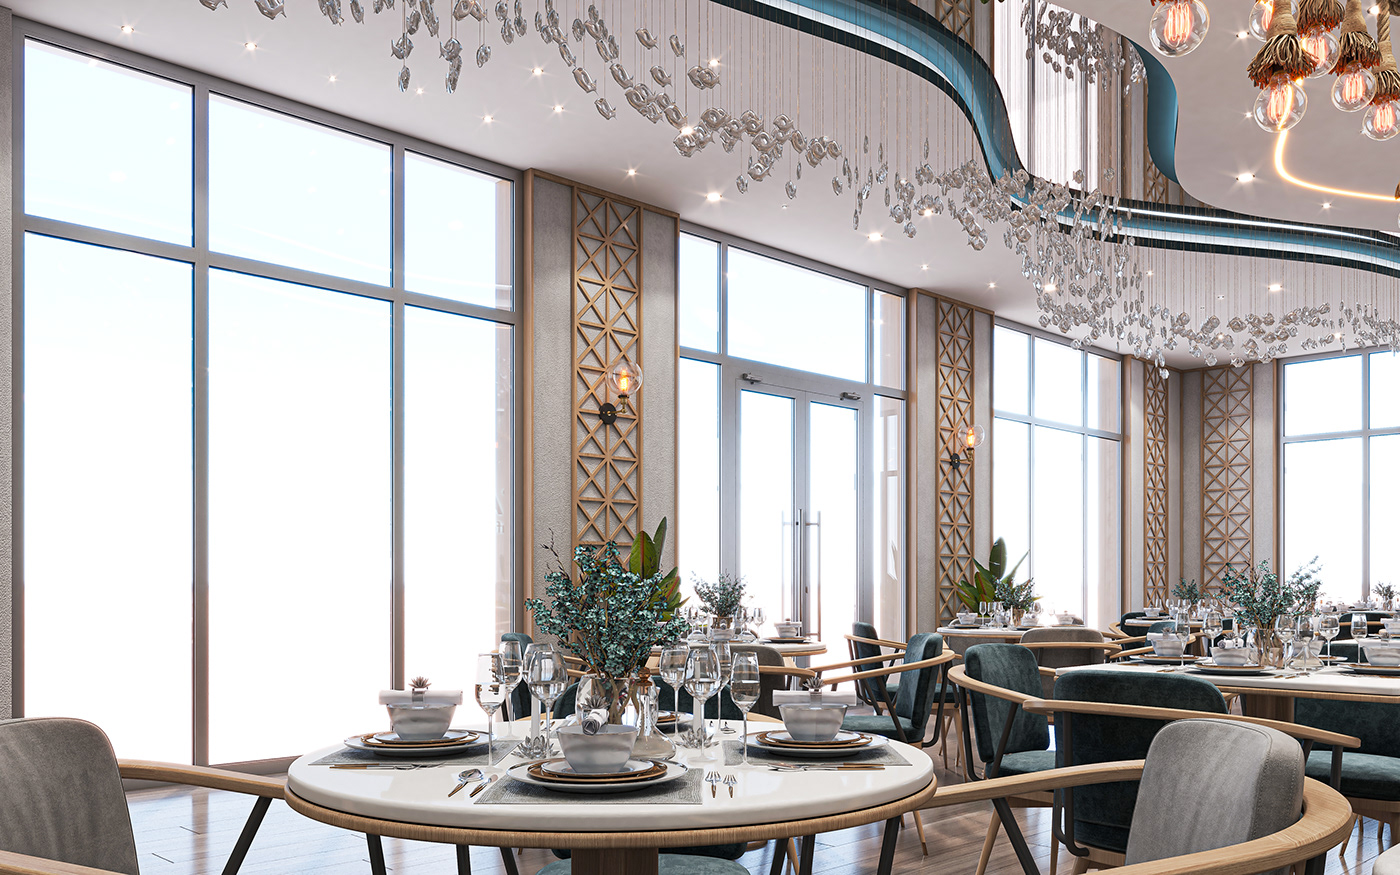 3dmax Render vray fish restaurant ropes Interior ceiling architecture visualization